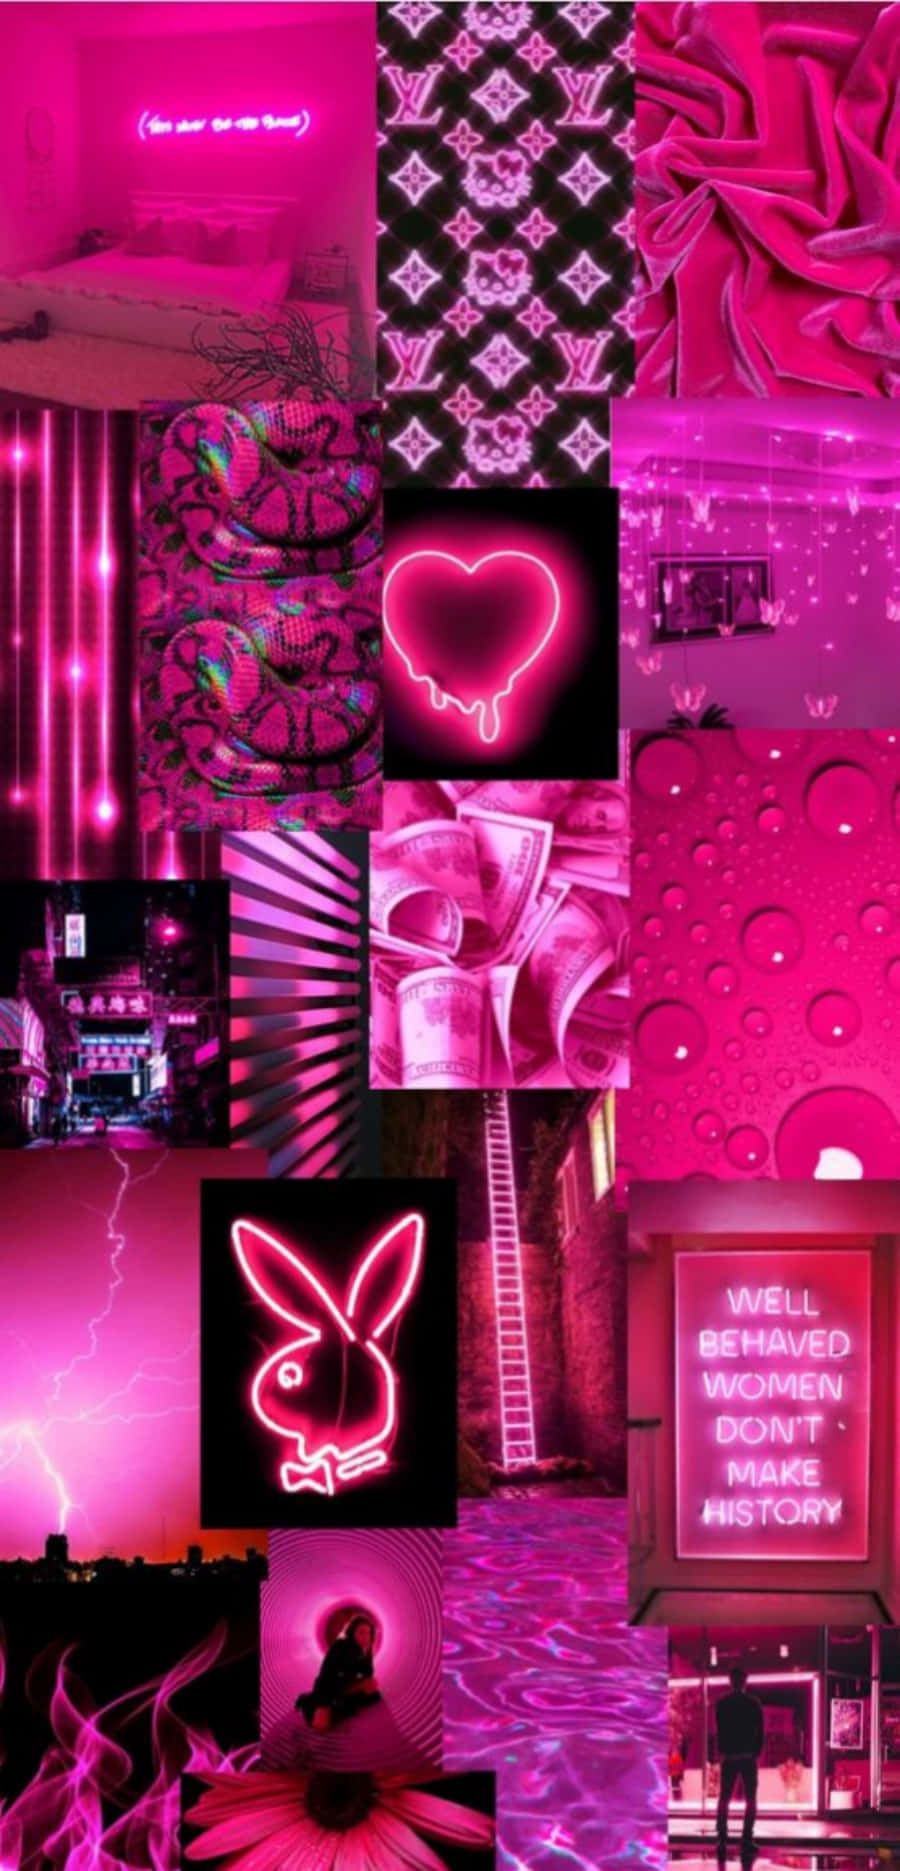 Download Neon Pink Aesthetic Pictures | Wallpapers.com